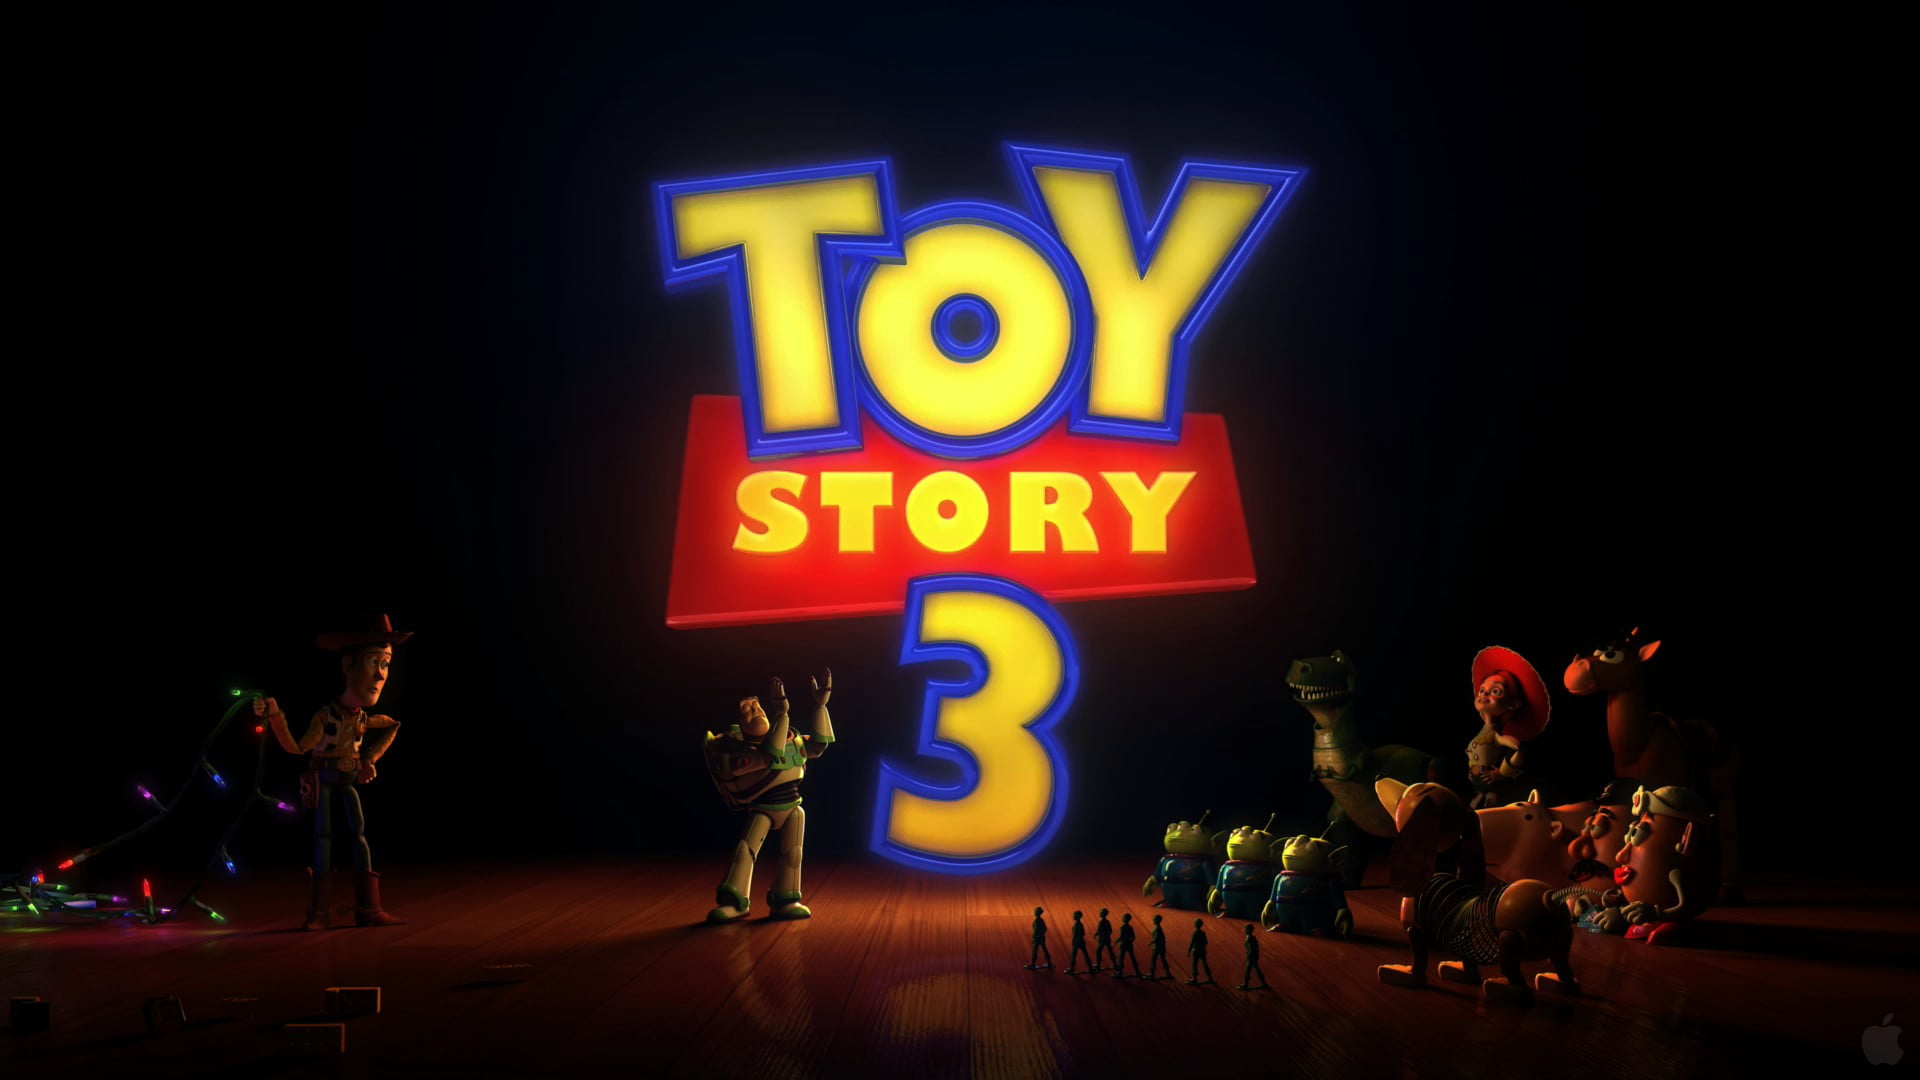 Toy Story 3 poster, movies, Toy Story, Toy Story 3, animated movies